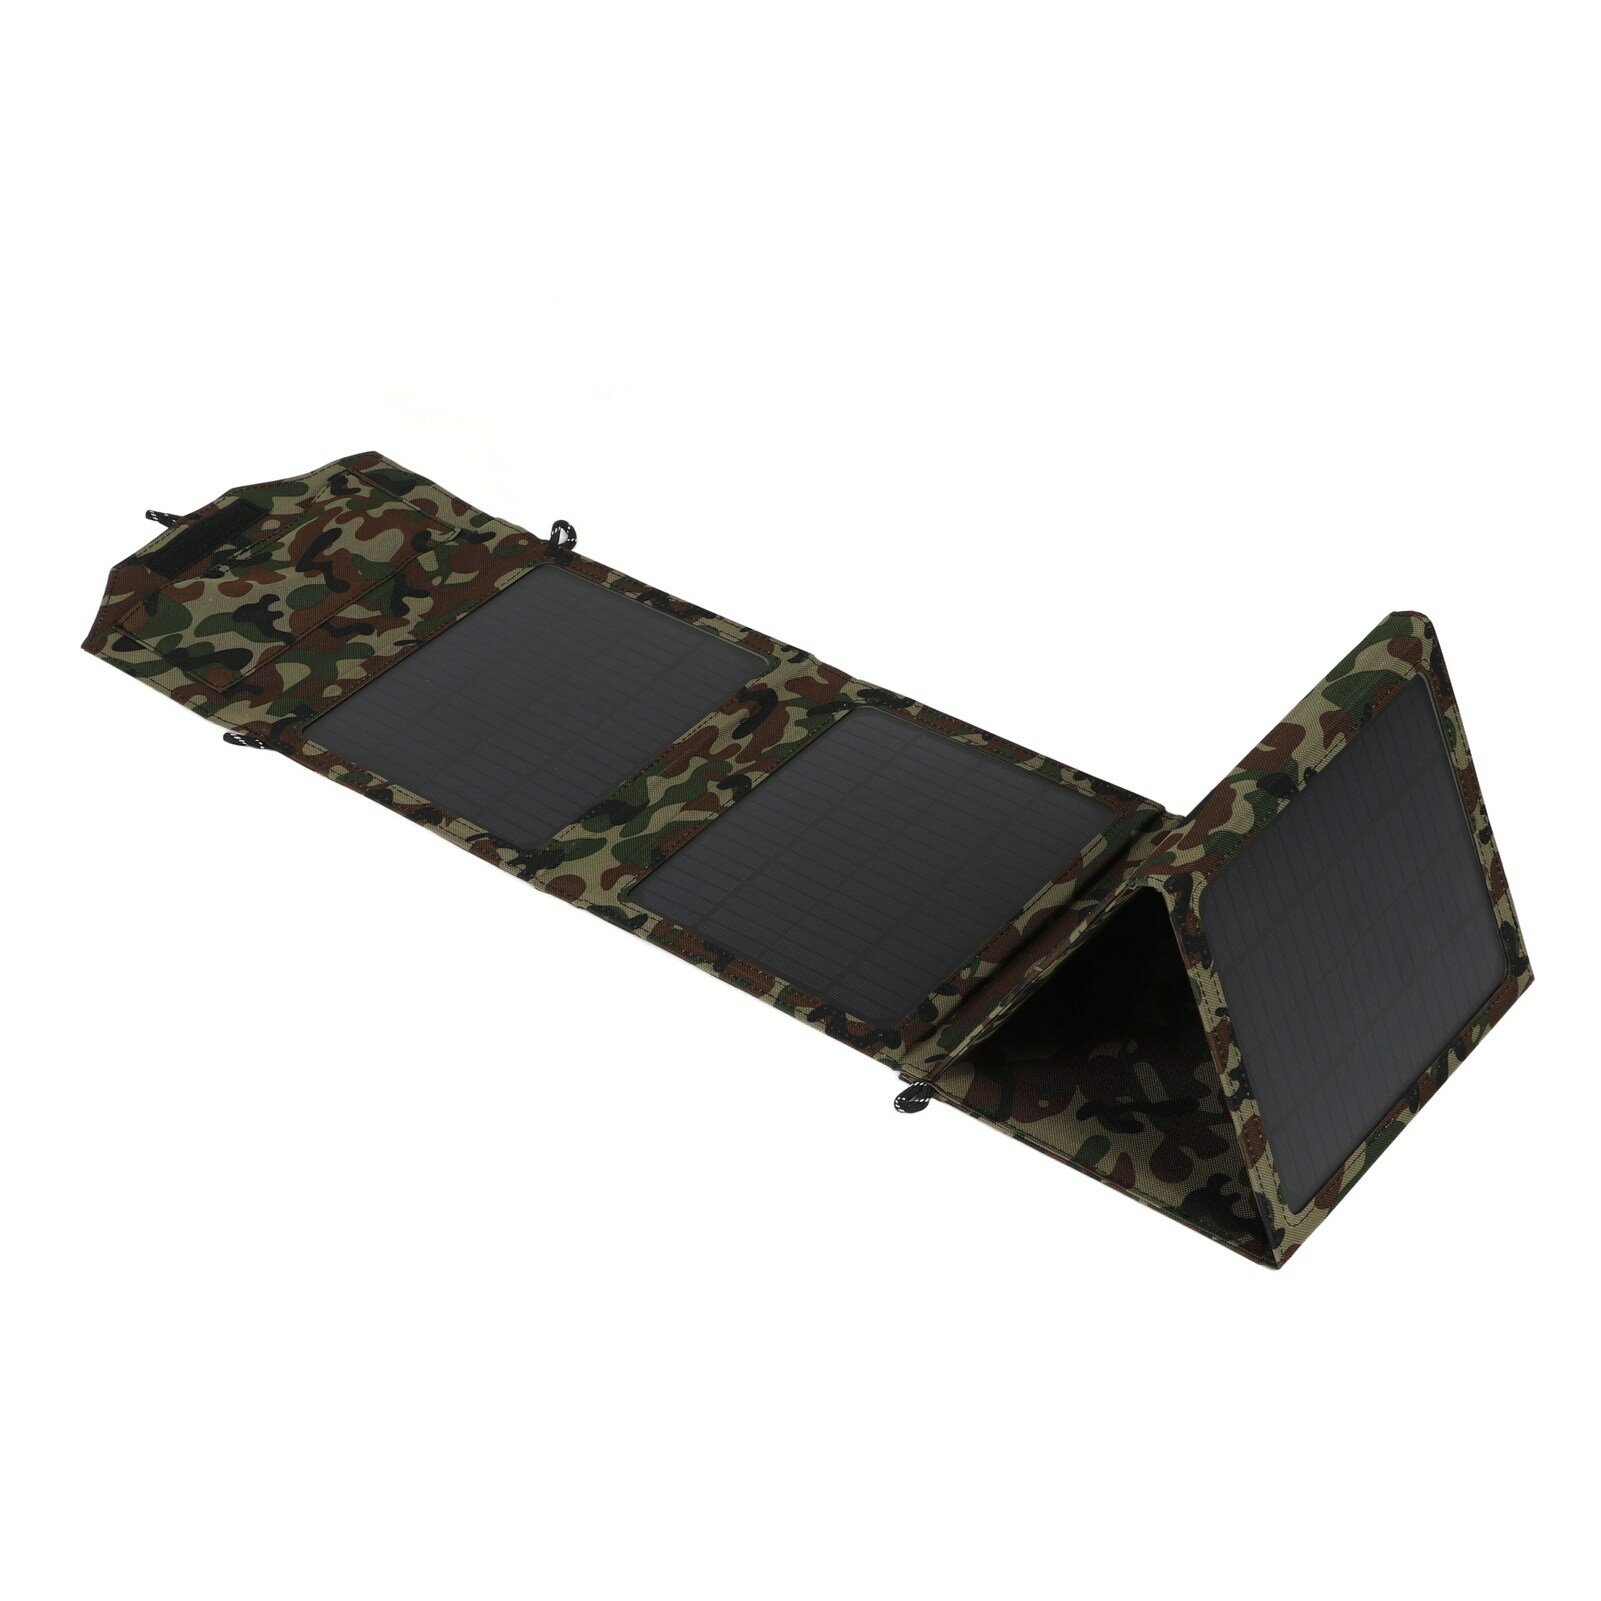 

50W Dual USB12-5V Solar Panel Folding Pack Single Crystal Camouflage Outdoor Emergency Charger